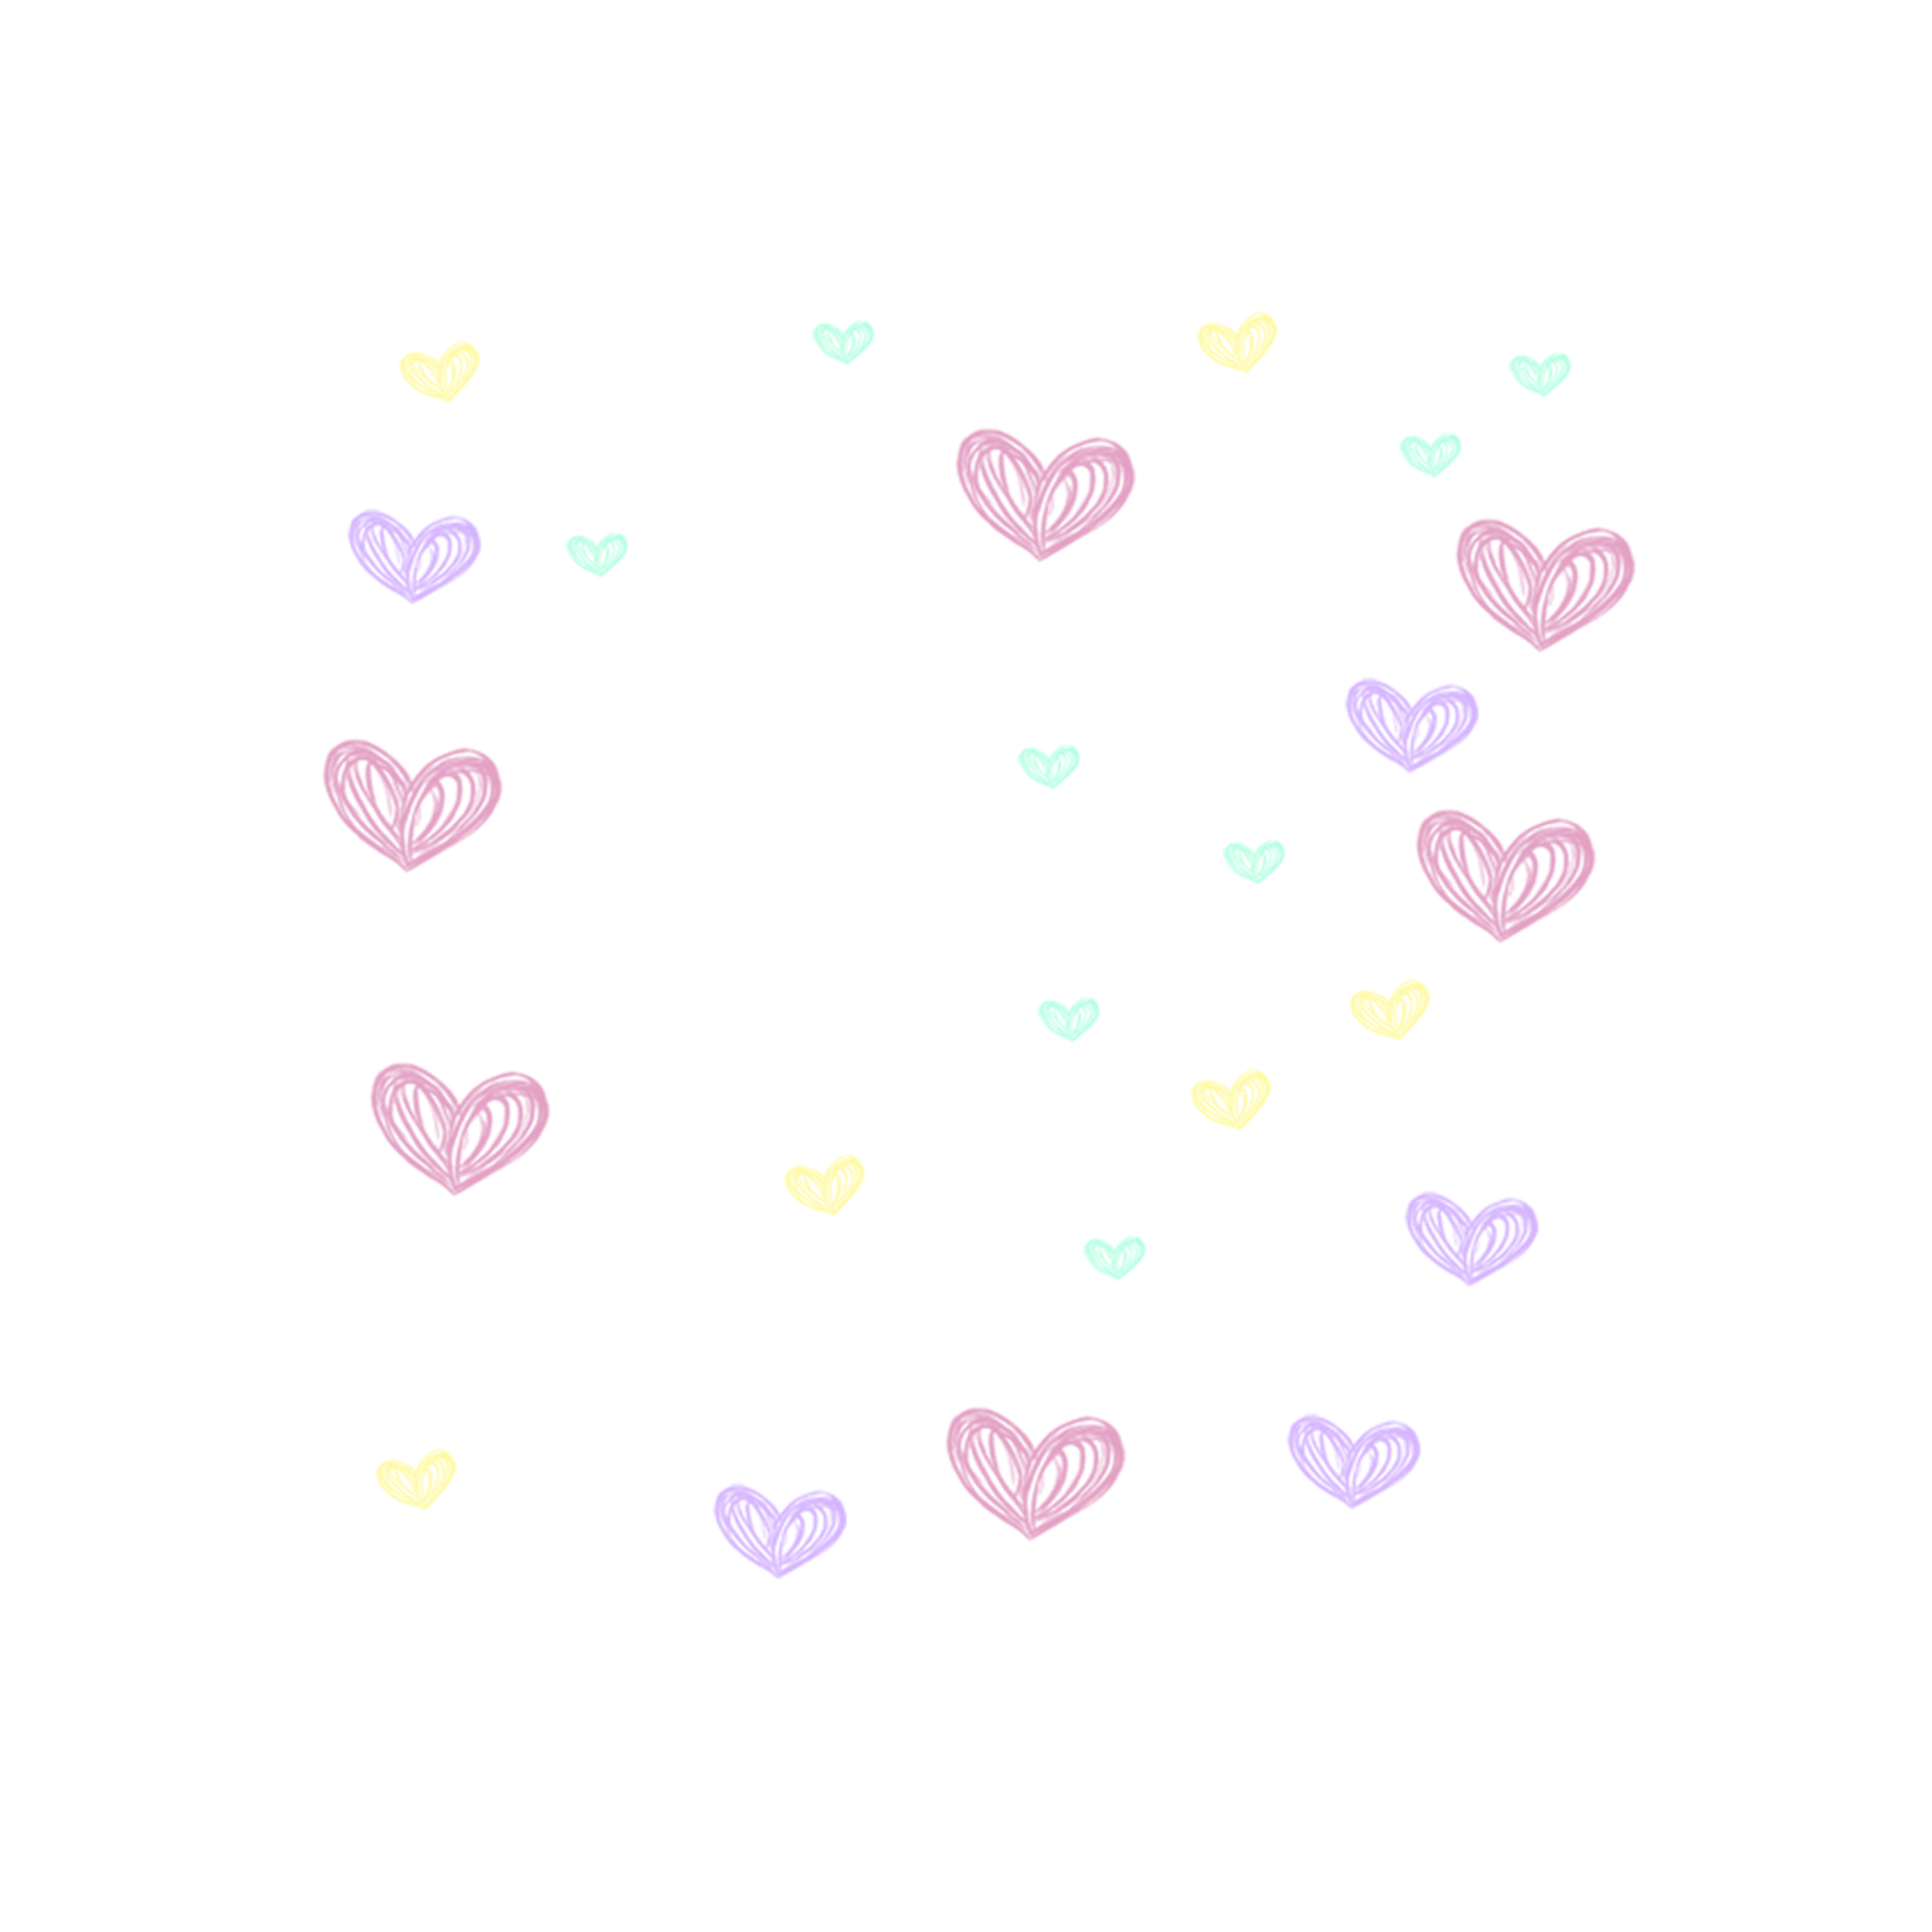 #heart #hearts #colorful #painting #pastel #cute #freetoedit